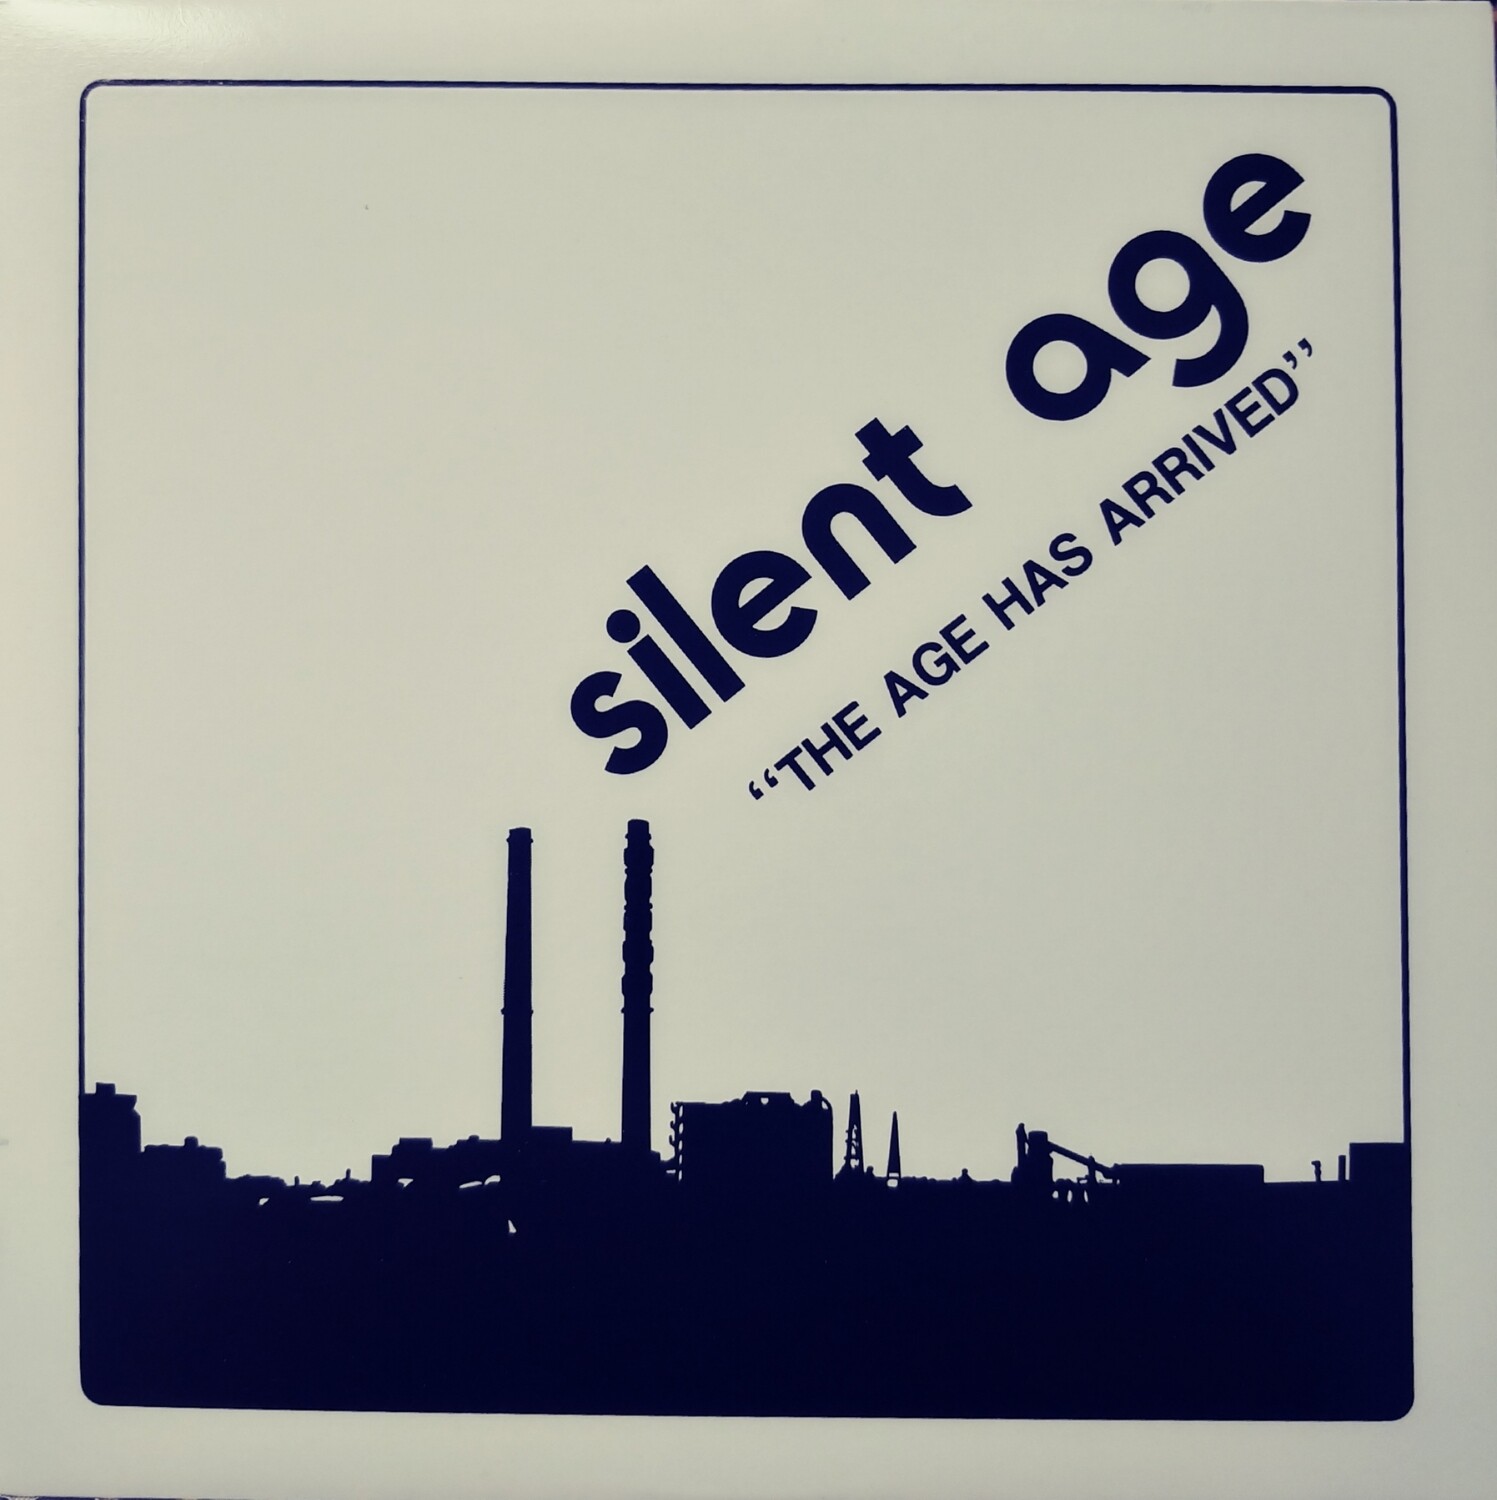 Silent Age - The age has arrived